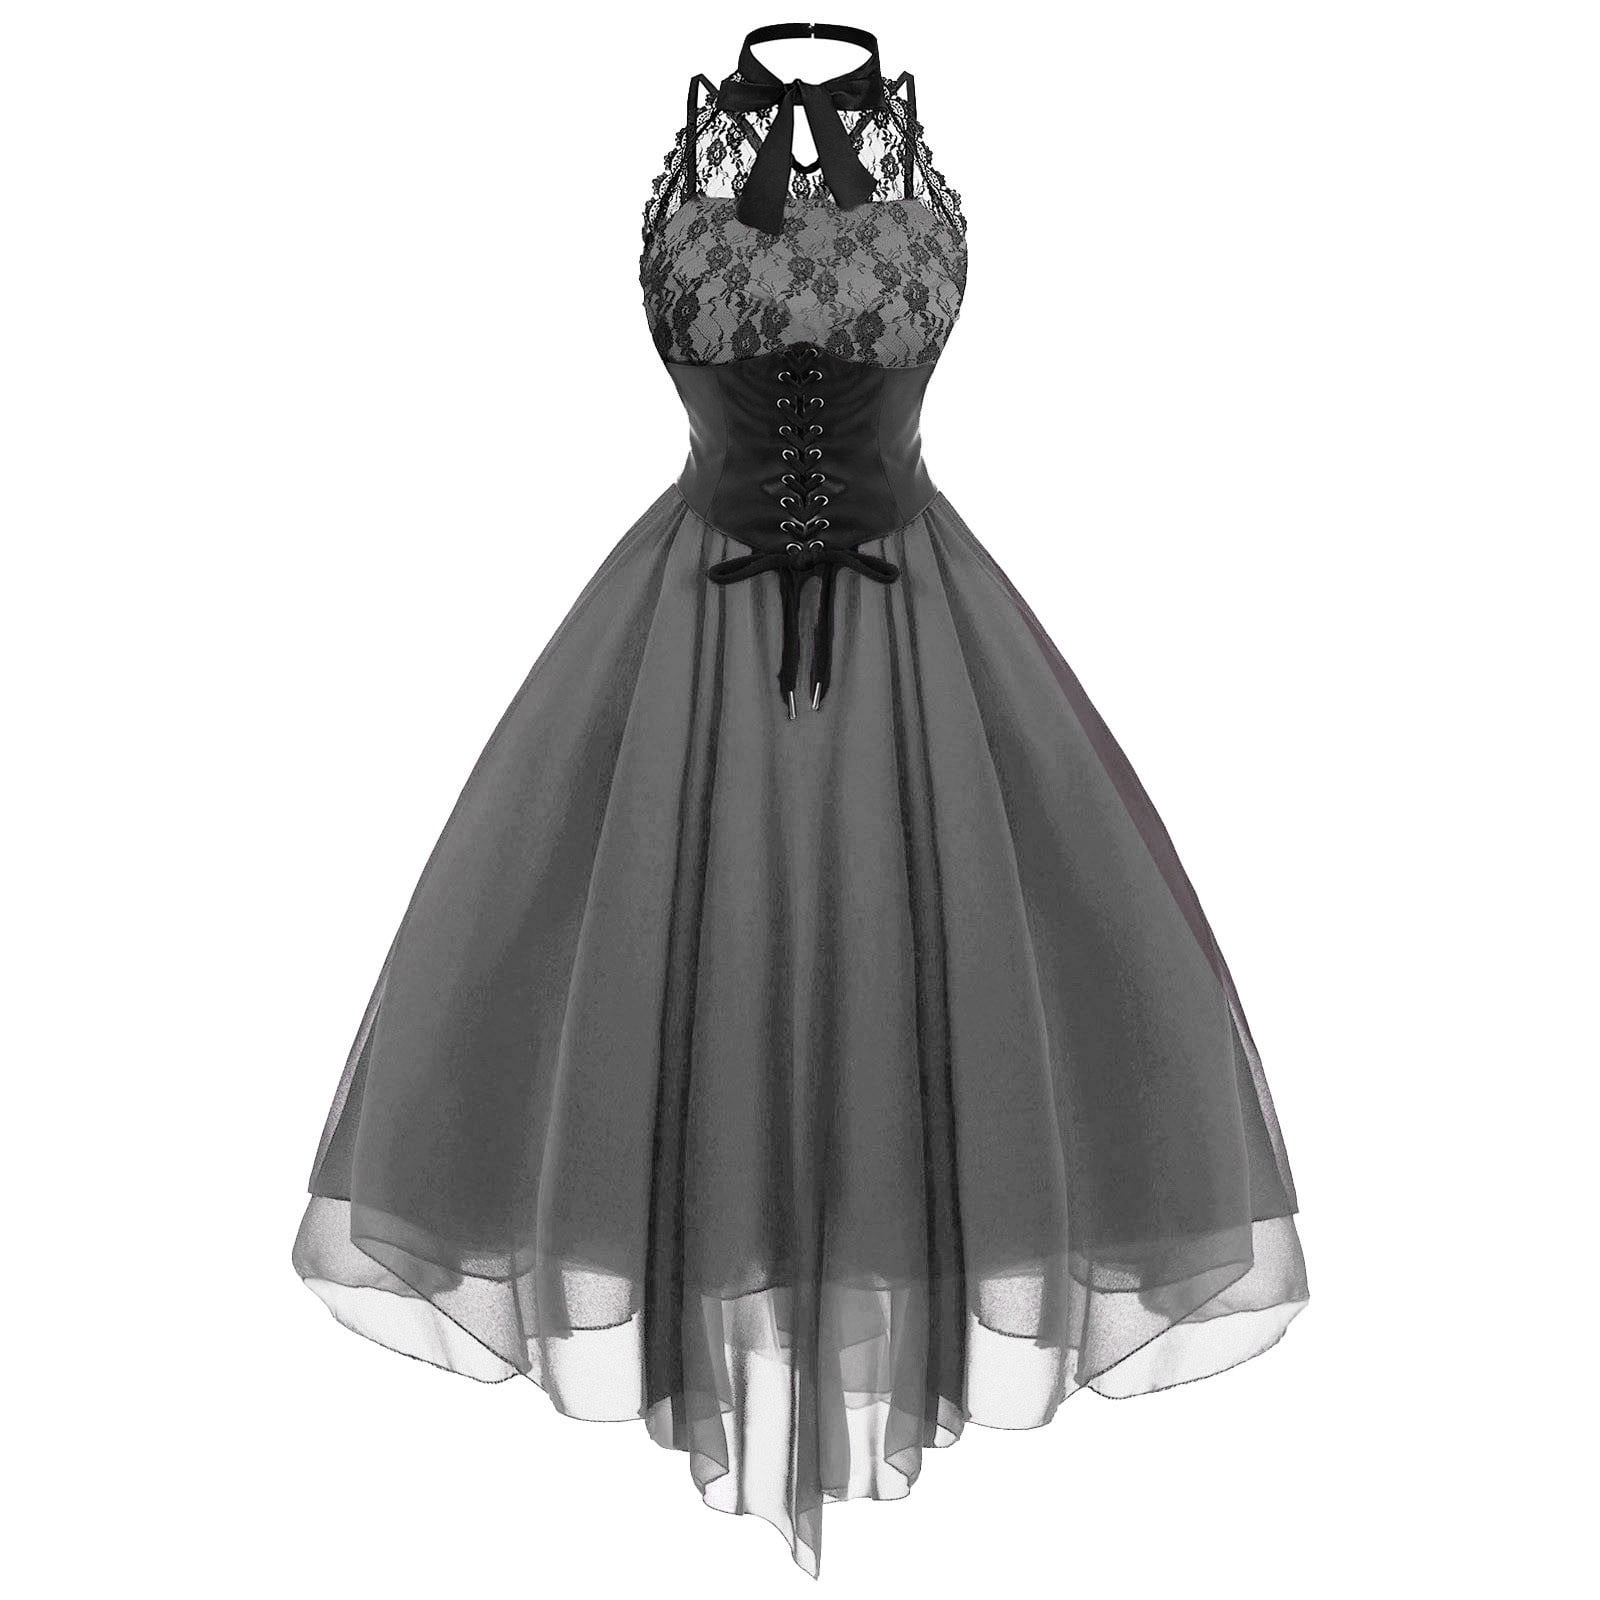 Gothic Dresses For Women Formal Retro Masquerade Dresses With Corset  Cocktail Dress Lace Chiffon Punk Hippie Dresses 